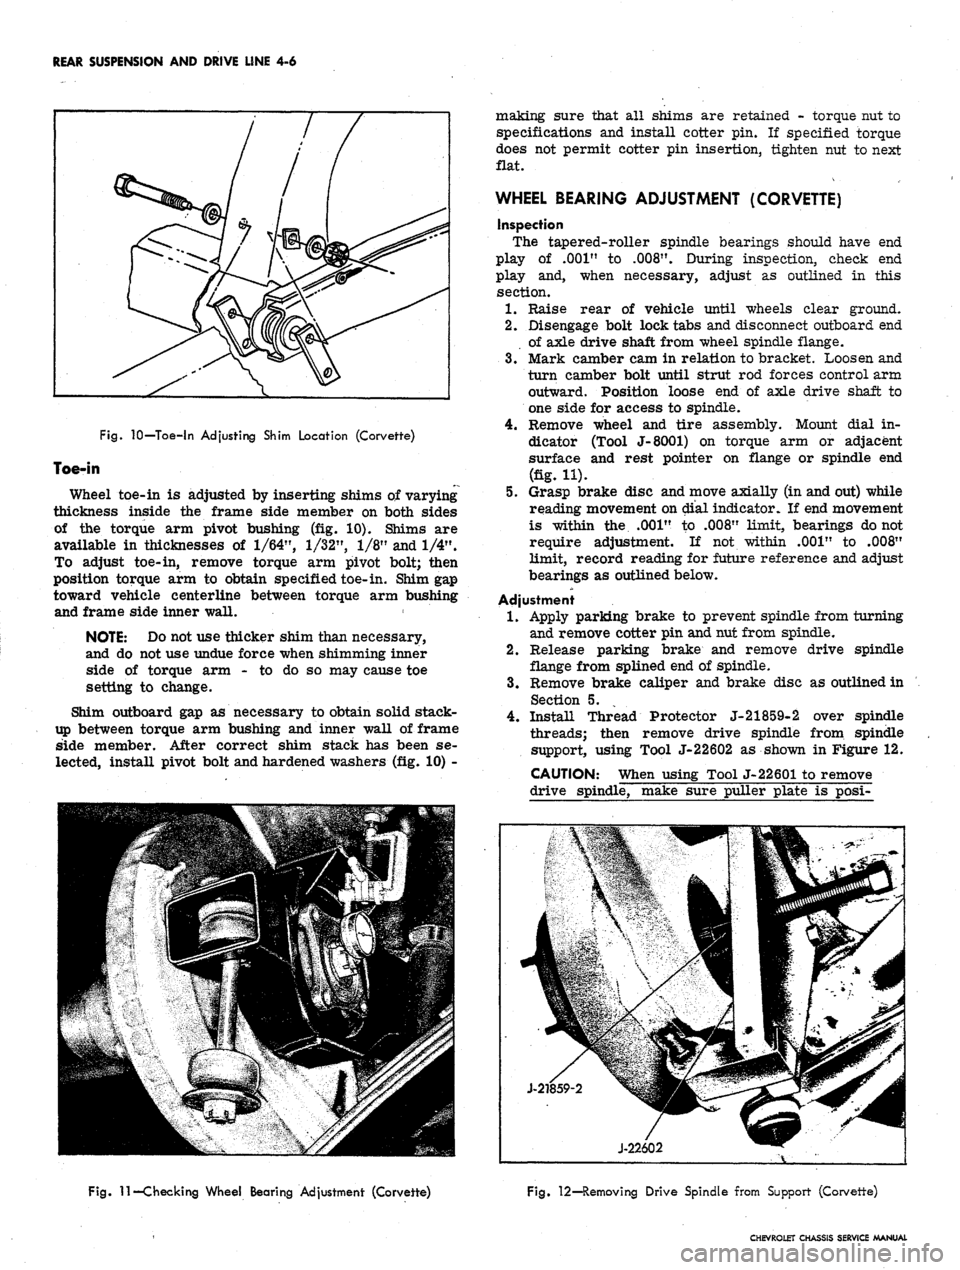 CHEVROLET CAMARO 1967 1.G Chassis User Guide 
REAR SUSPENSION AND DRIVE LINE 4-6

Fig.
 10—Toe-in Adjusting Shim Location (Corvette)

Toe-in

Wheel toe-in is adjusted by inserting shims of varying

thickness inside the frame side member on bot